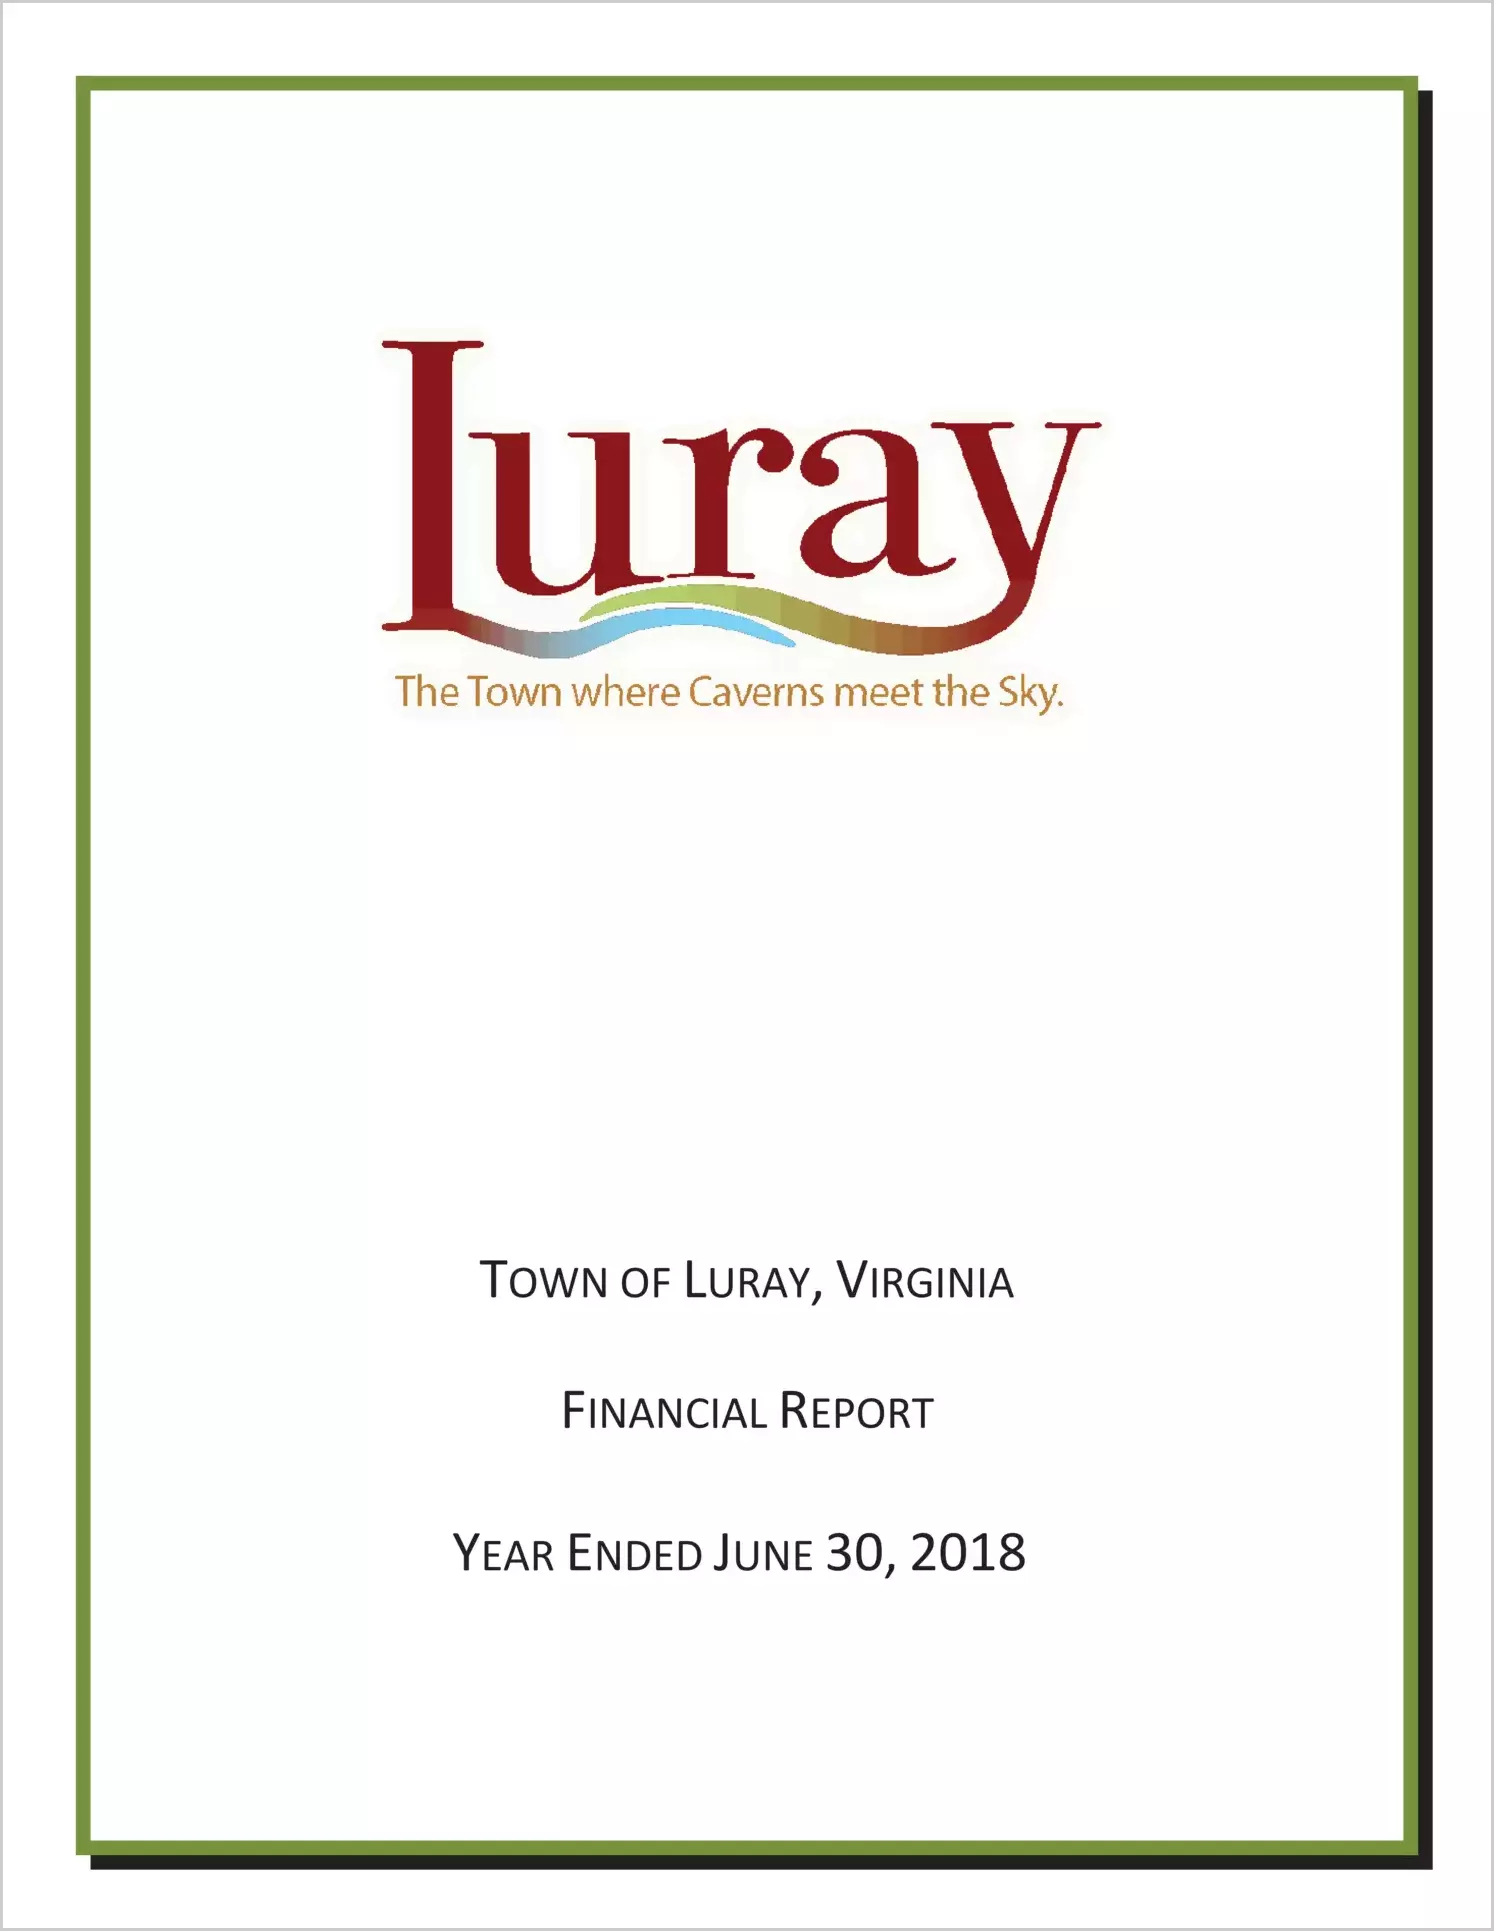 2018 Annual Financial Report for Town of Luray